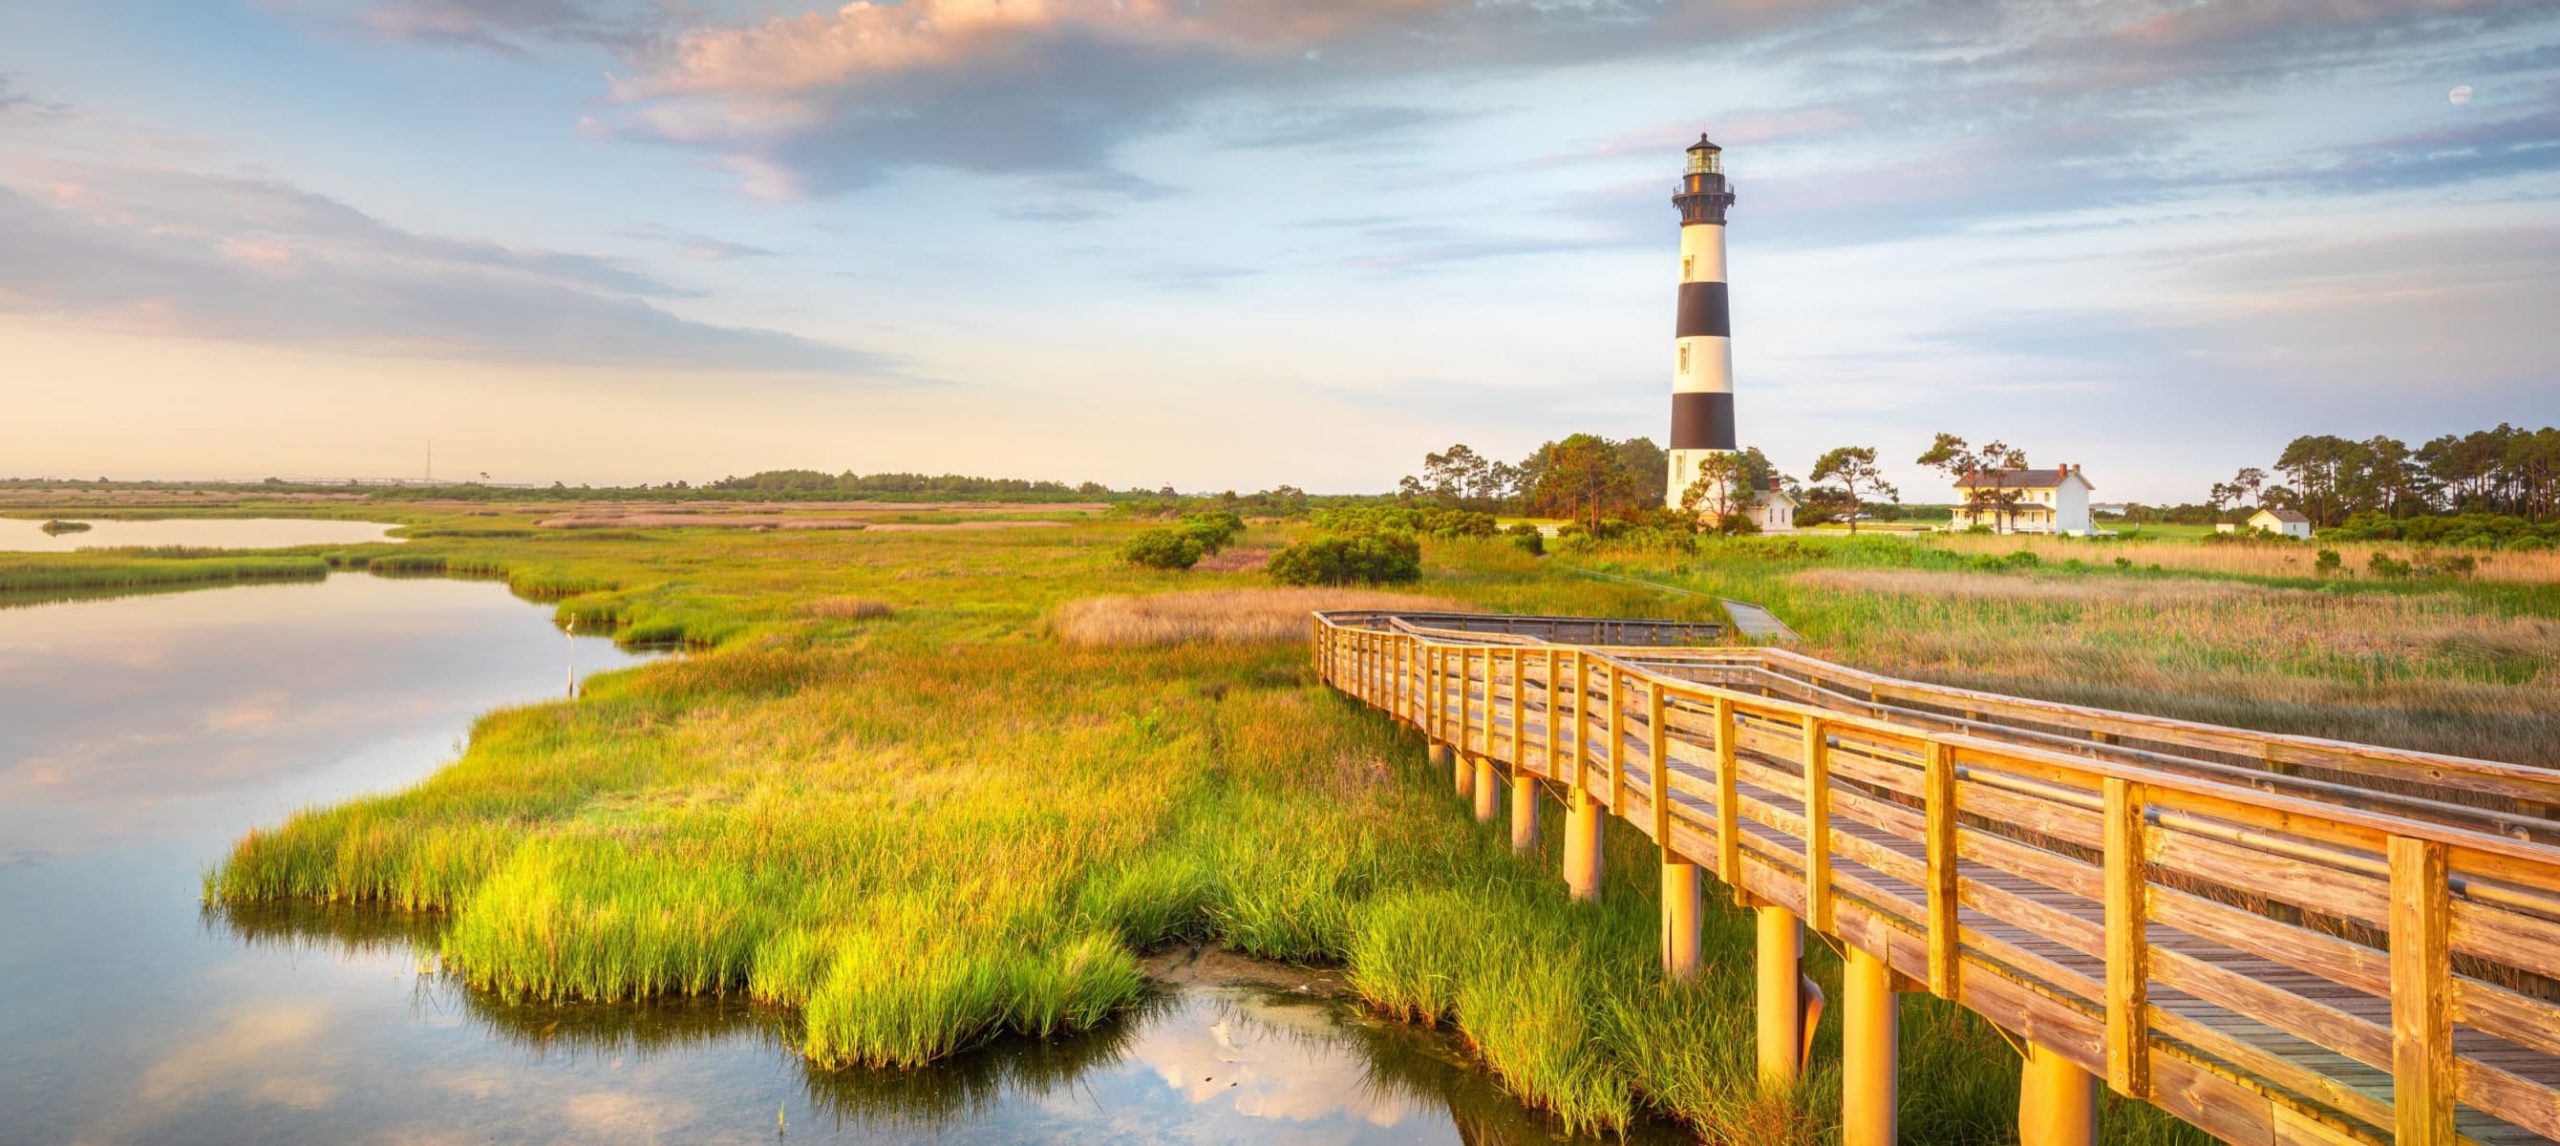 7 Amazing Things To Do In The Outer Banks, NC